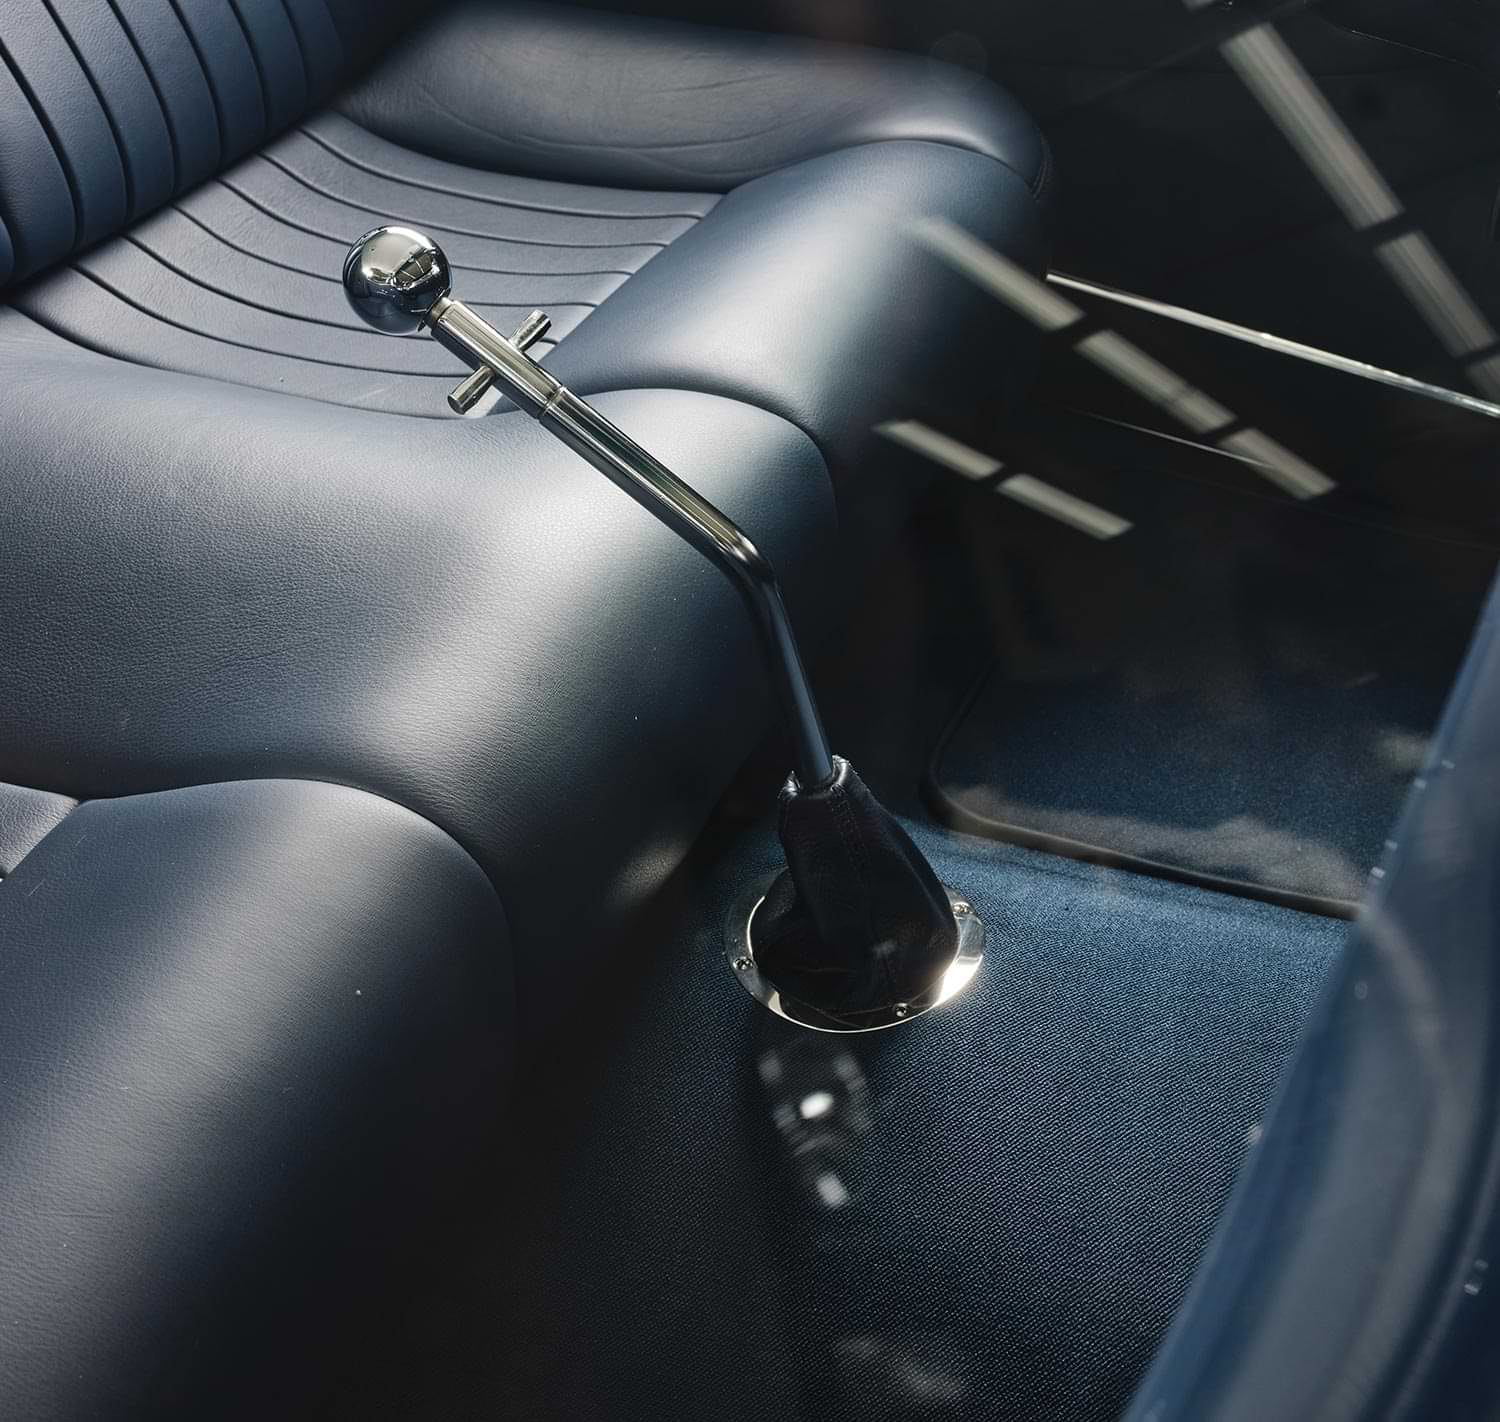 the '56 Chevy 210's gear stick